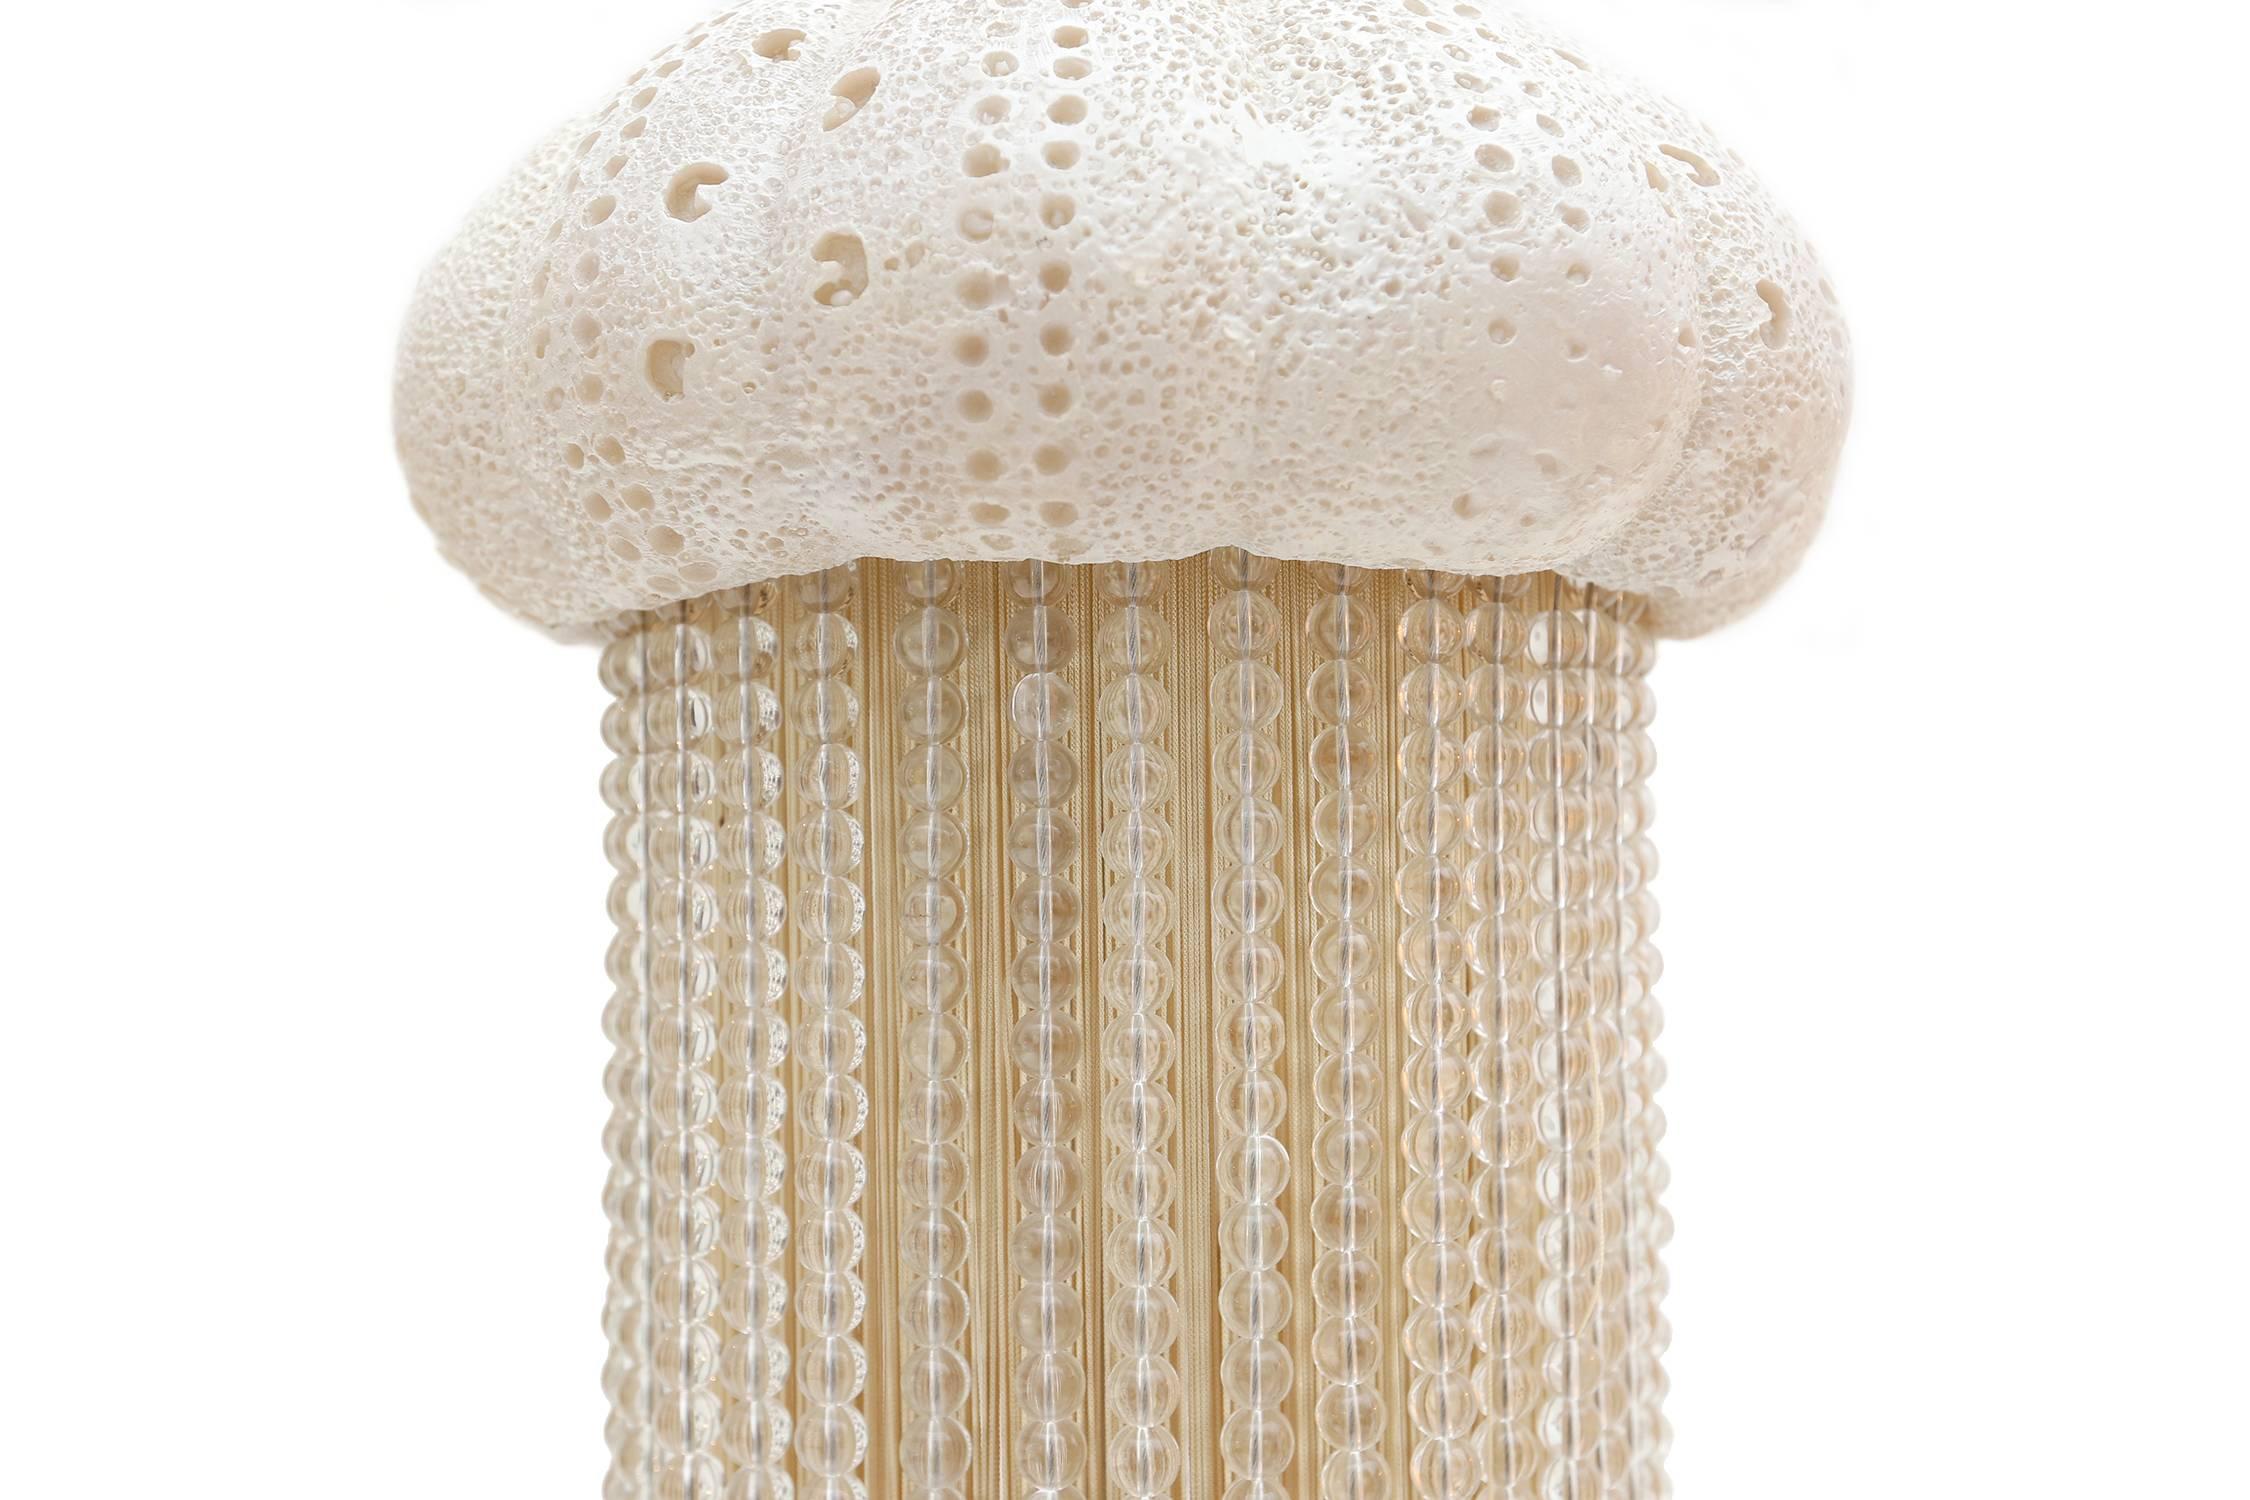 Modern Jacques Garcia Jelly Fish Floor Lamp